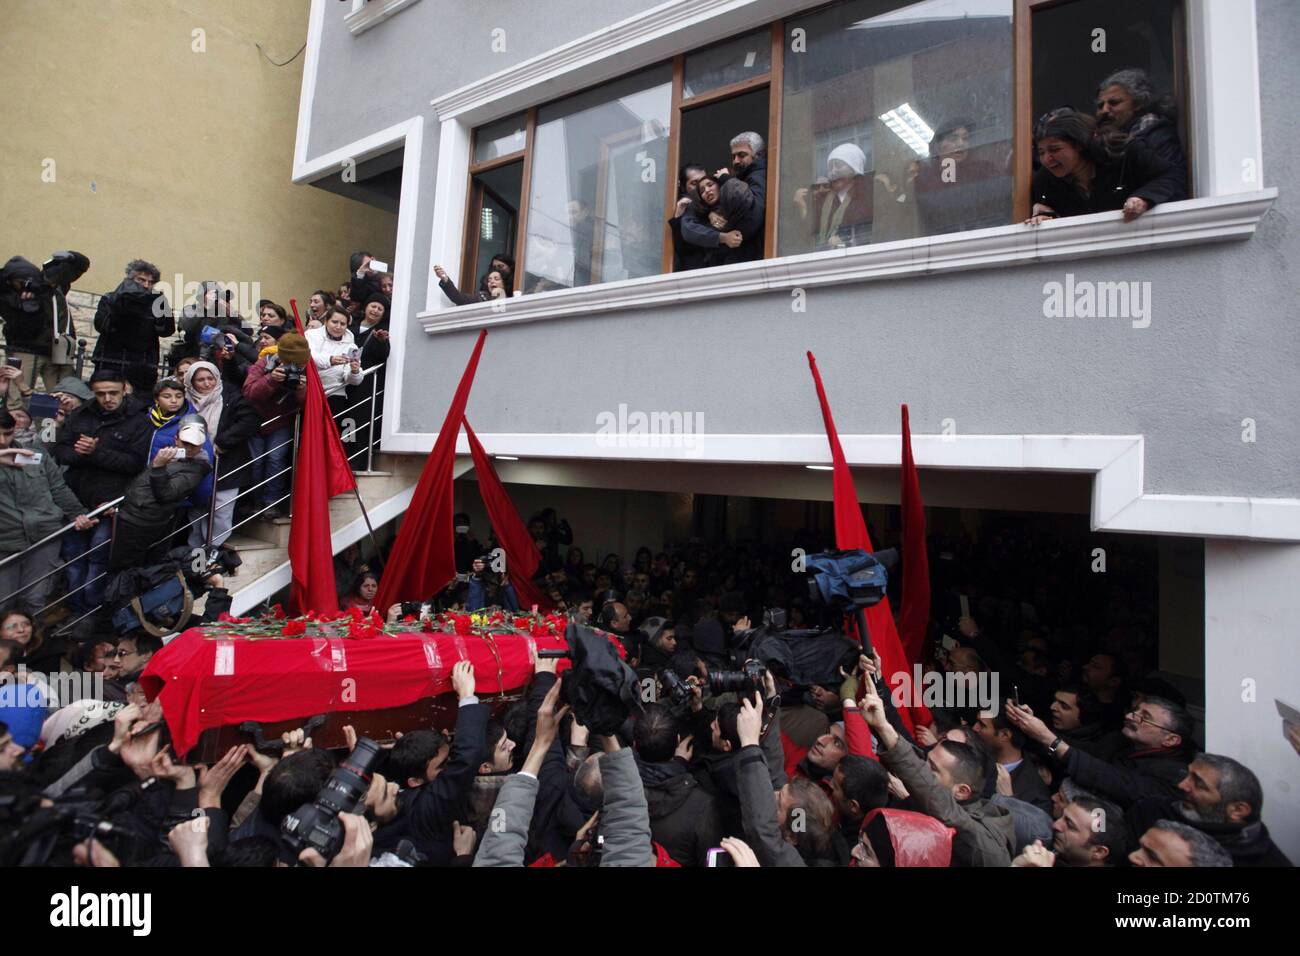 Berkin Elvan's mother Gulsum (R window panel) and sister Ozge (C window panel) react as his coffin arrives at the Okmeydani cemevi, an Alevi place of worship, in Istanbul March 11, 2014. Police and protesters clashed in Turkey's two biggest cities on Tuesday following the death of the 15-year-old boy who suffered a head injury during anti-government demonstrations last summer. Elvan, then aged 14, got caught up in street battles in Istanbul between police and protesters on June 16 after going out to buy bread for his family. He was struck in the head by a tear-gas canister and went into a coma Stock Photo